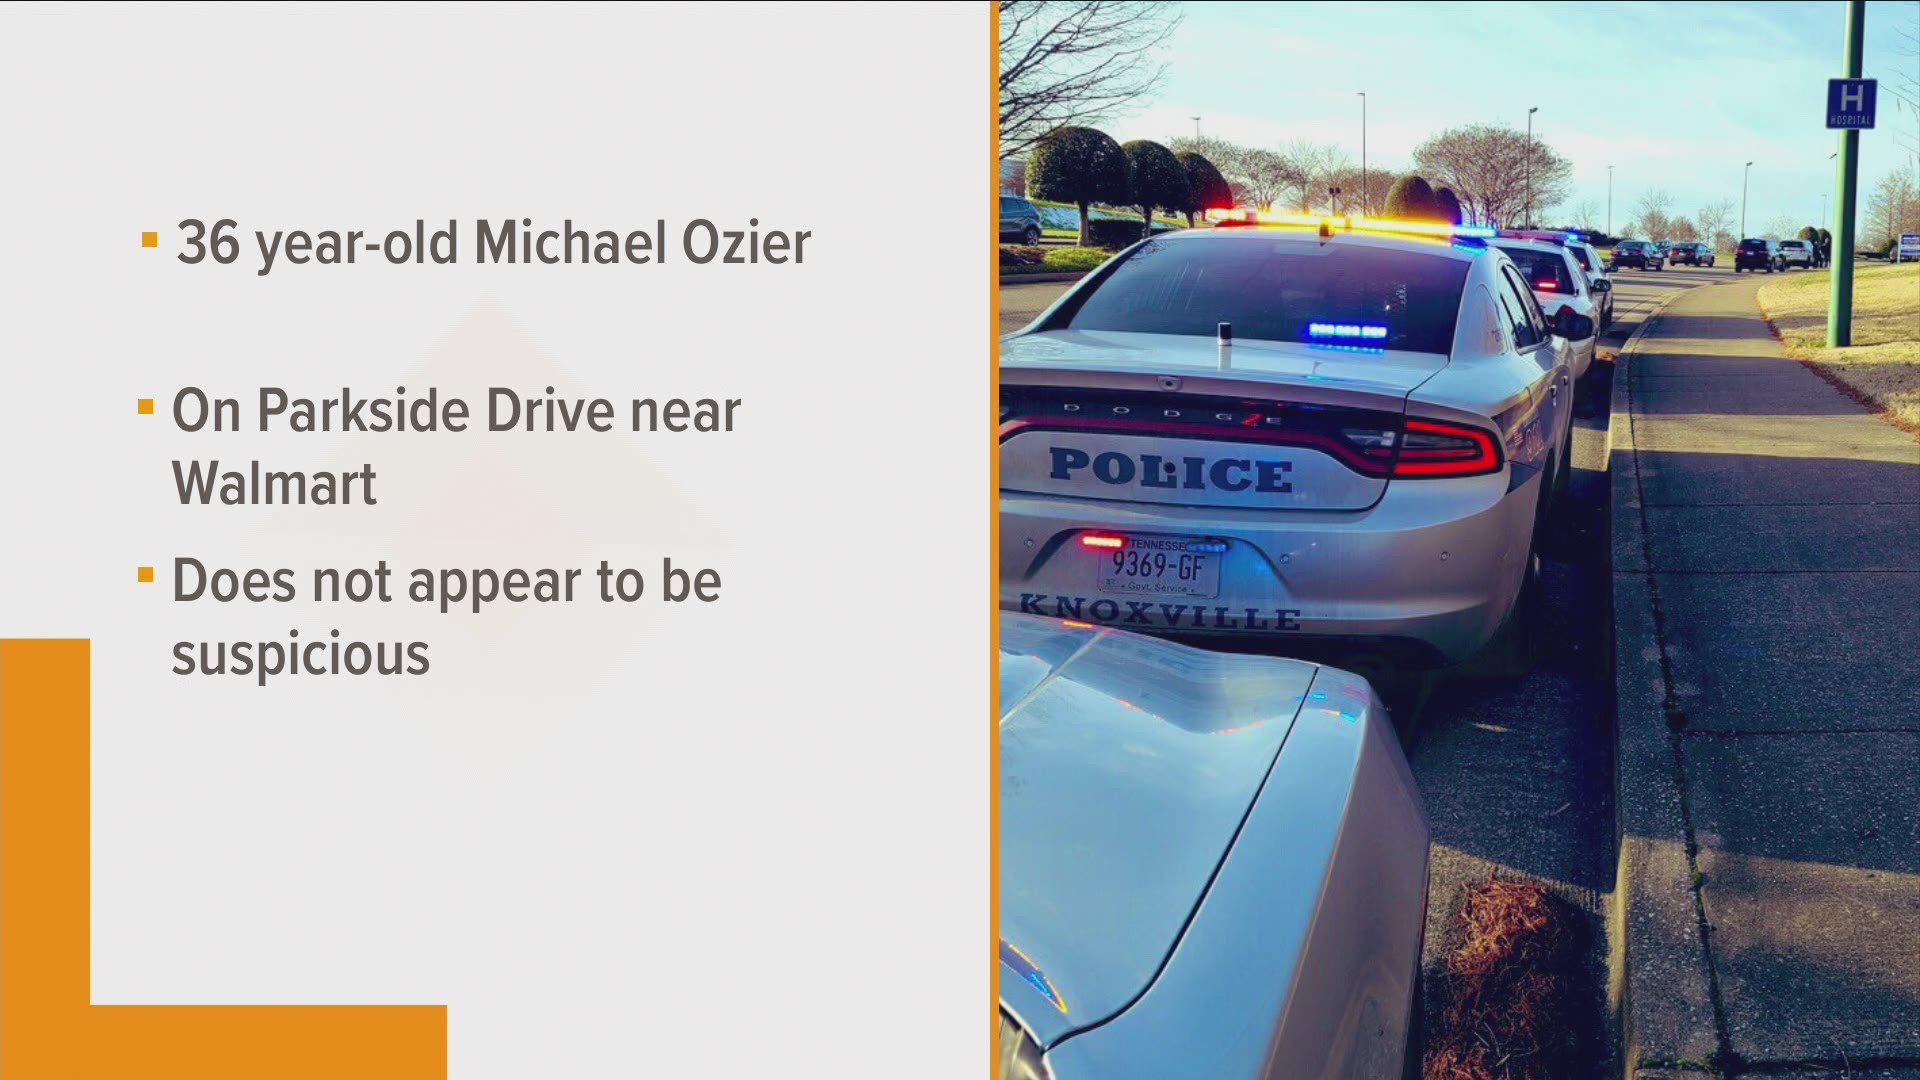 Officers found 36-year-old Michael Ozier's body on Parkside Drive near Walmart.